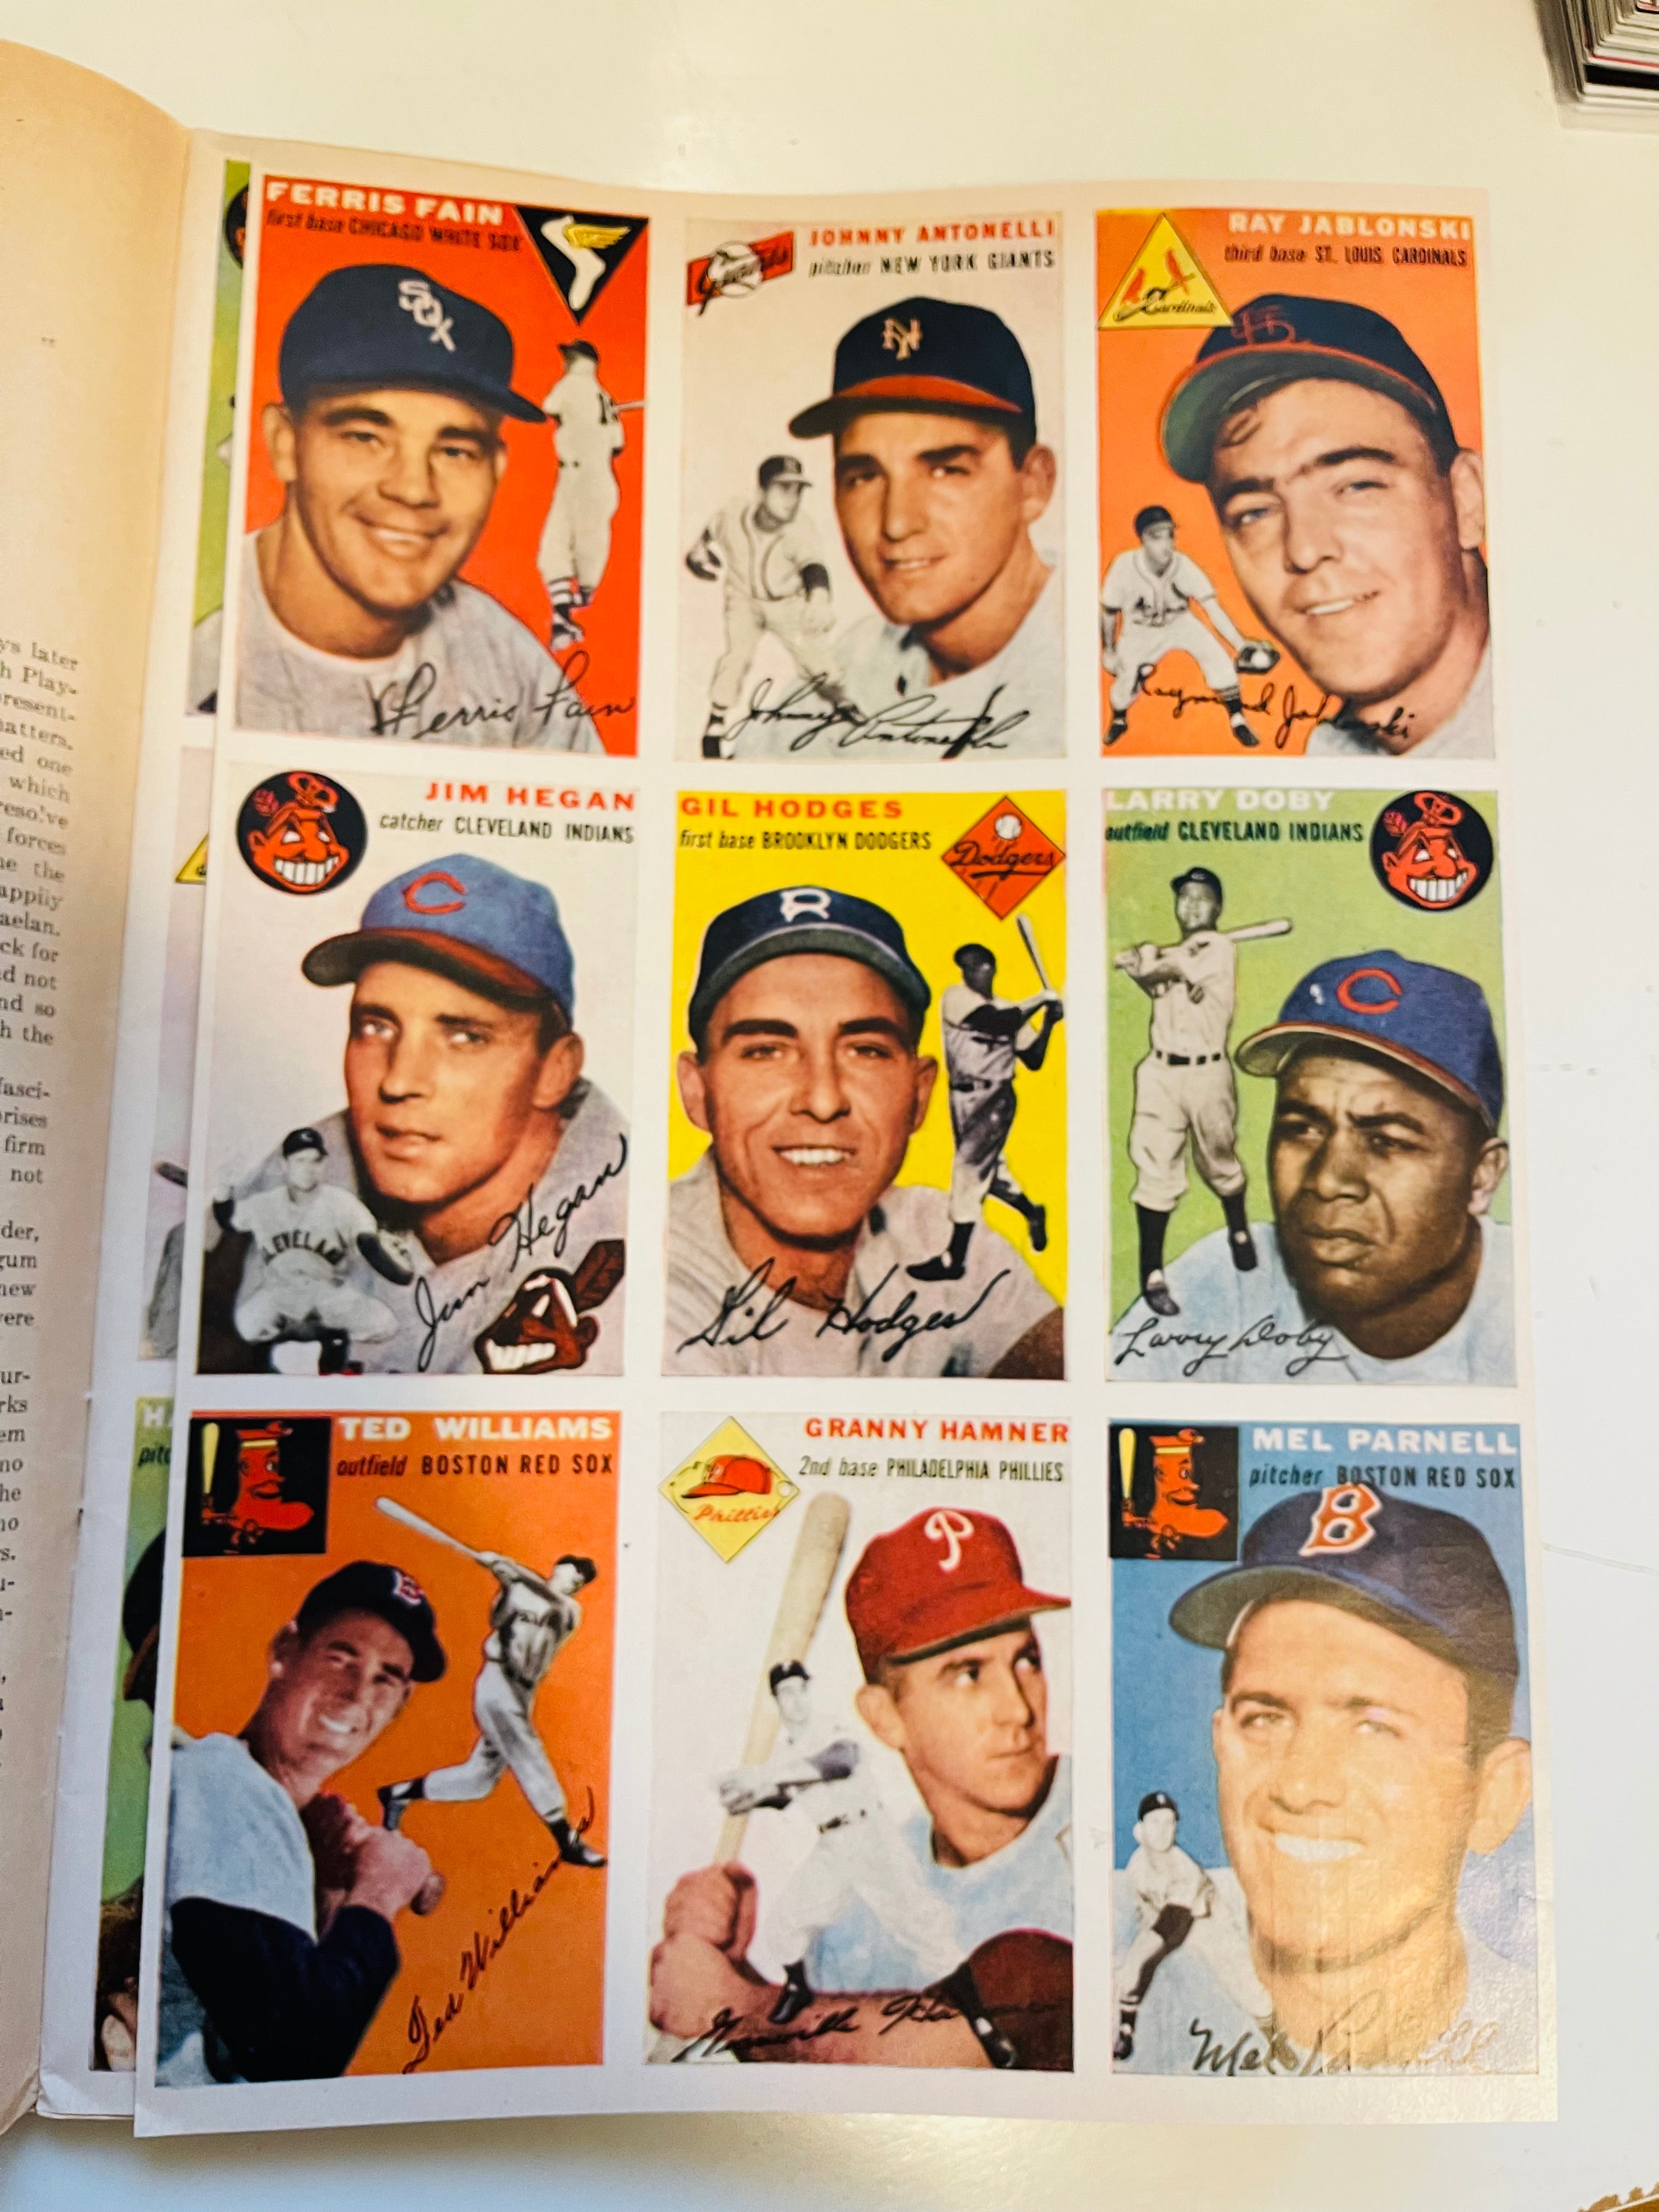 Sports Illustrated #1 rare first issue with Topps baseball cards sheet 1954